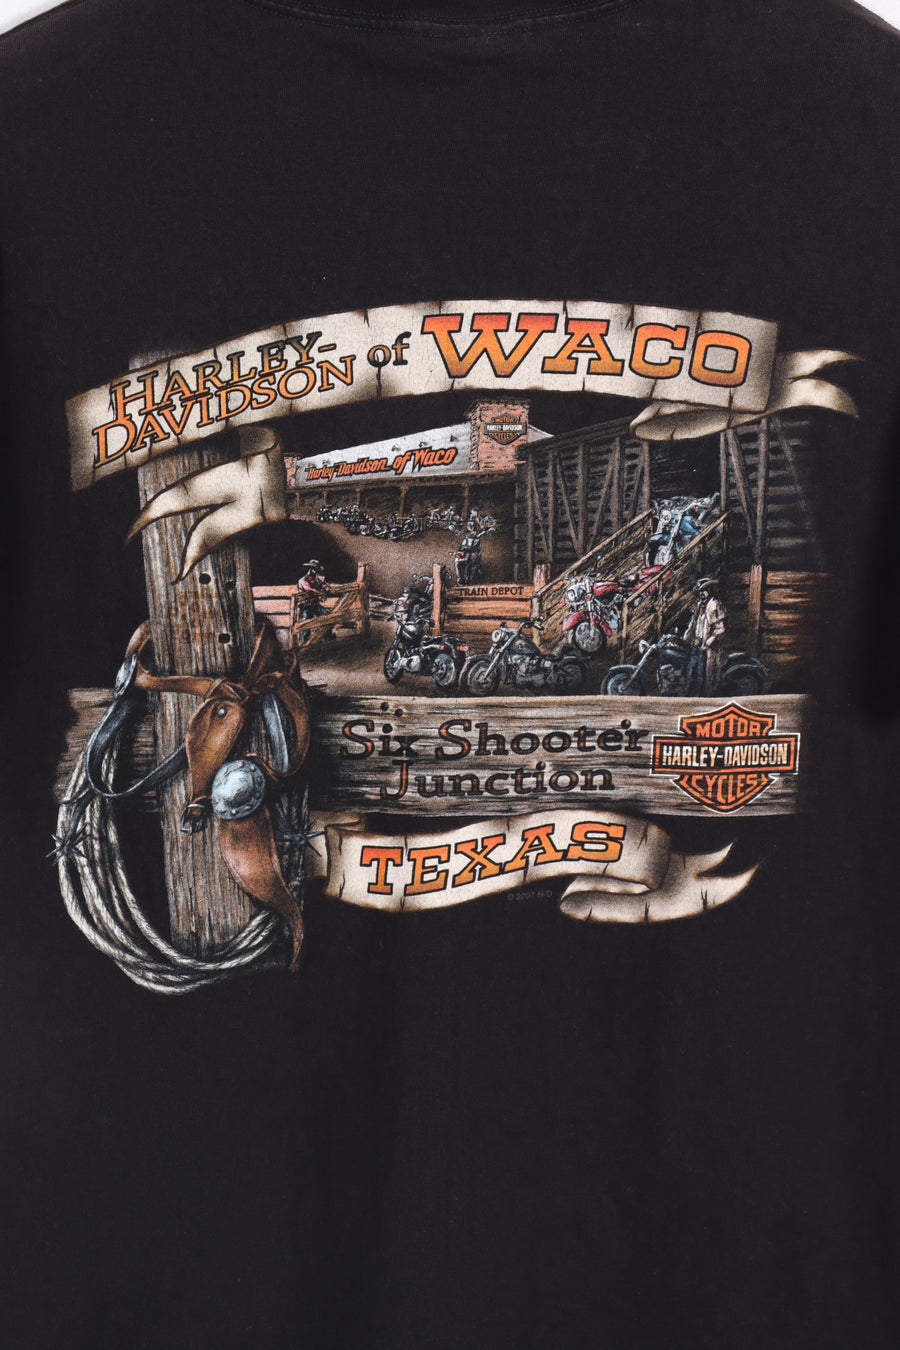 HARLEY DAVIDSON 'Forged In Iron' Jester Texas Wagon USA Made Tee (S-M)